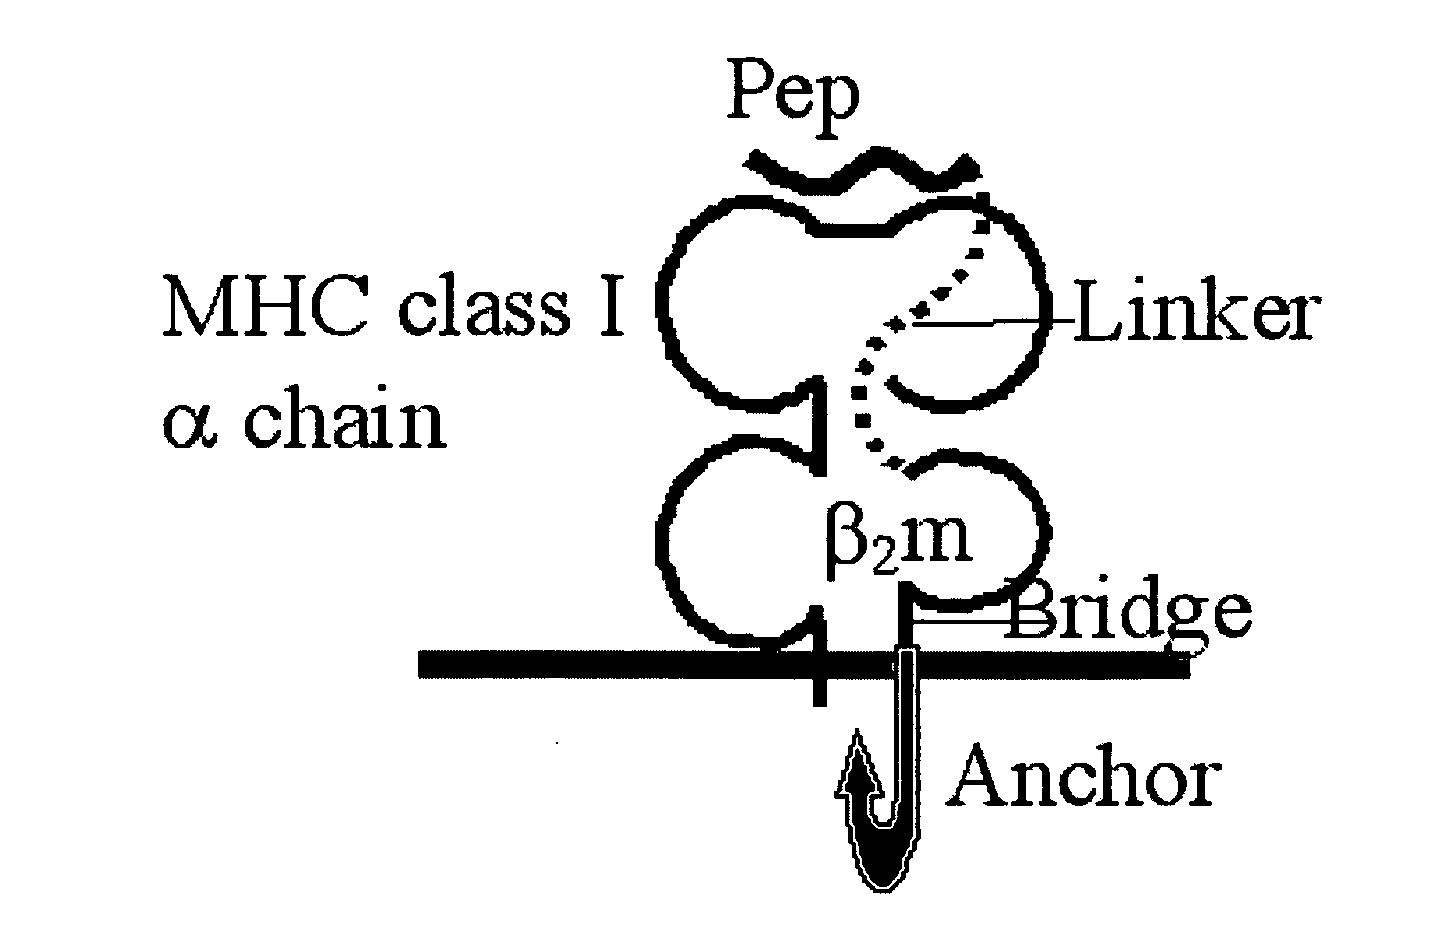 Membrane-anchored beta2 microglobulincovalently linked to MHC class I peptide epitopes